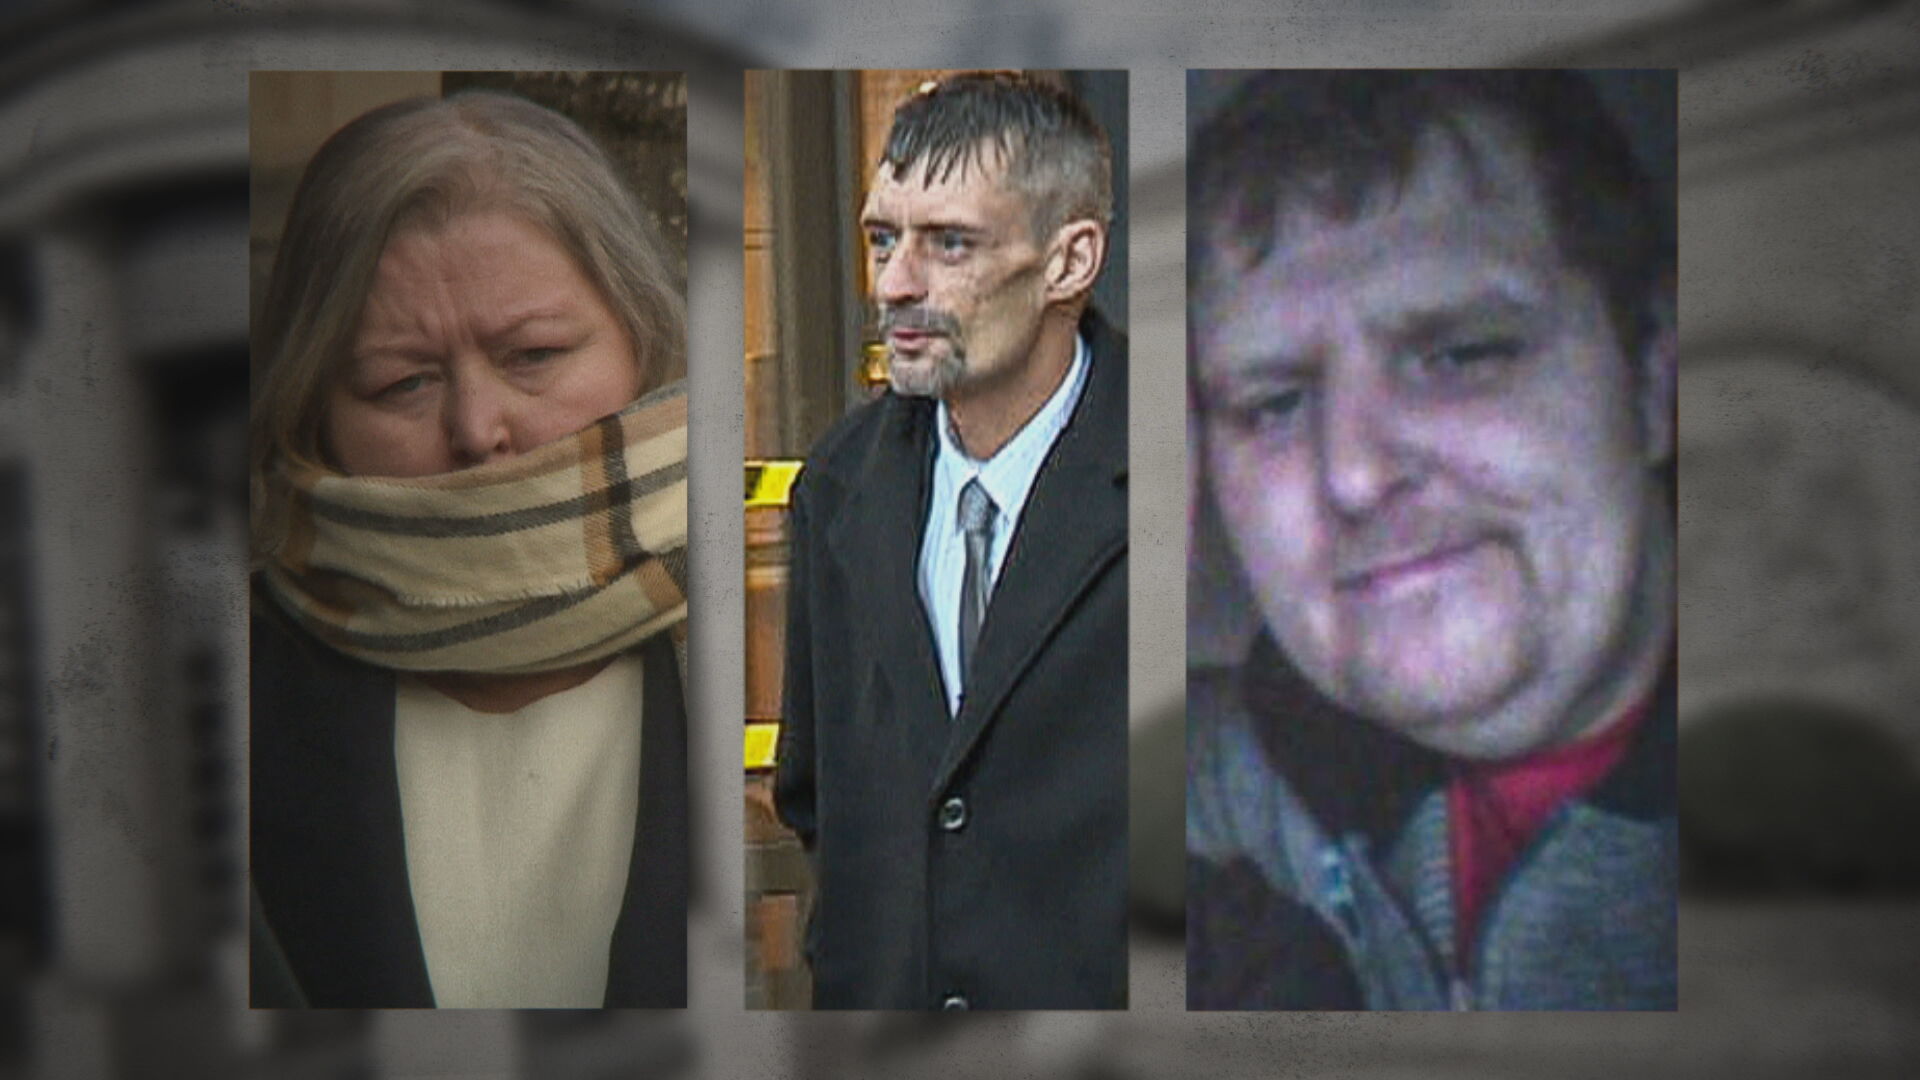 From left to right: Donna Marie Brand, Andrew Kelly and Robert O'Brien. Three found guilty of murdering Caroline Glachan.